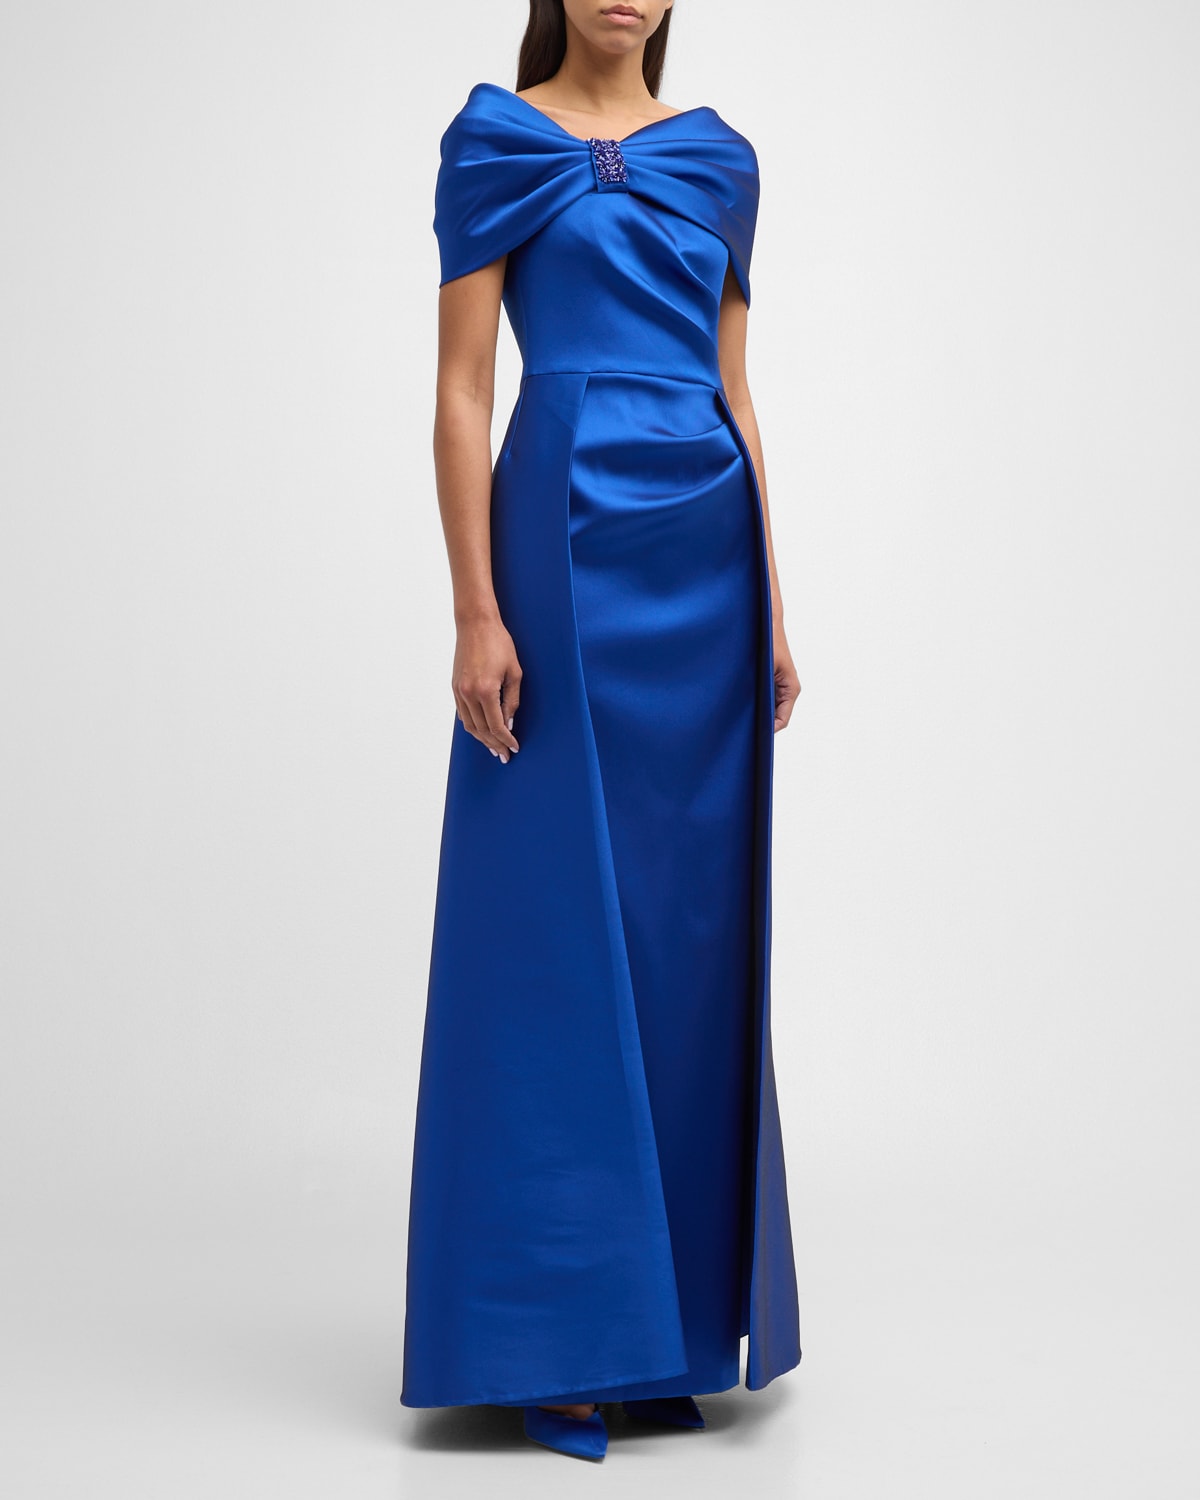 Rickie Freeman For Teri Jon Pleated Off-shoulder Jewel-embellished Gown In Royal Blue